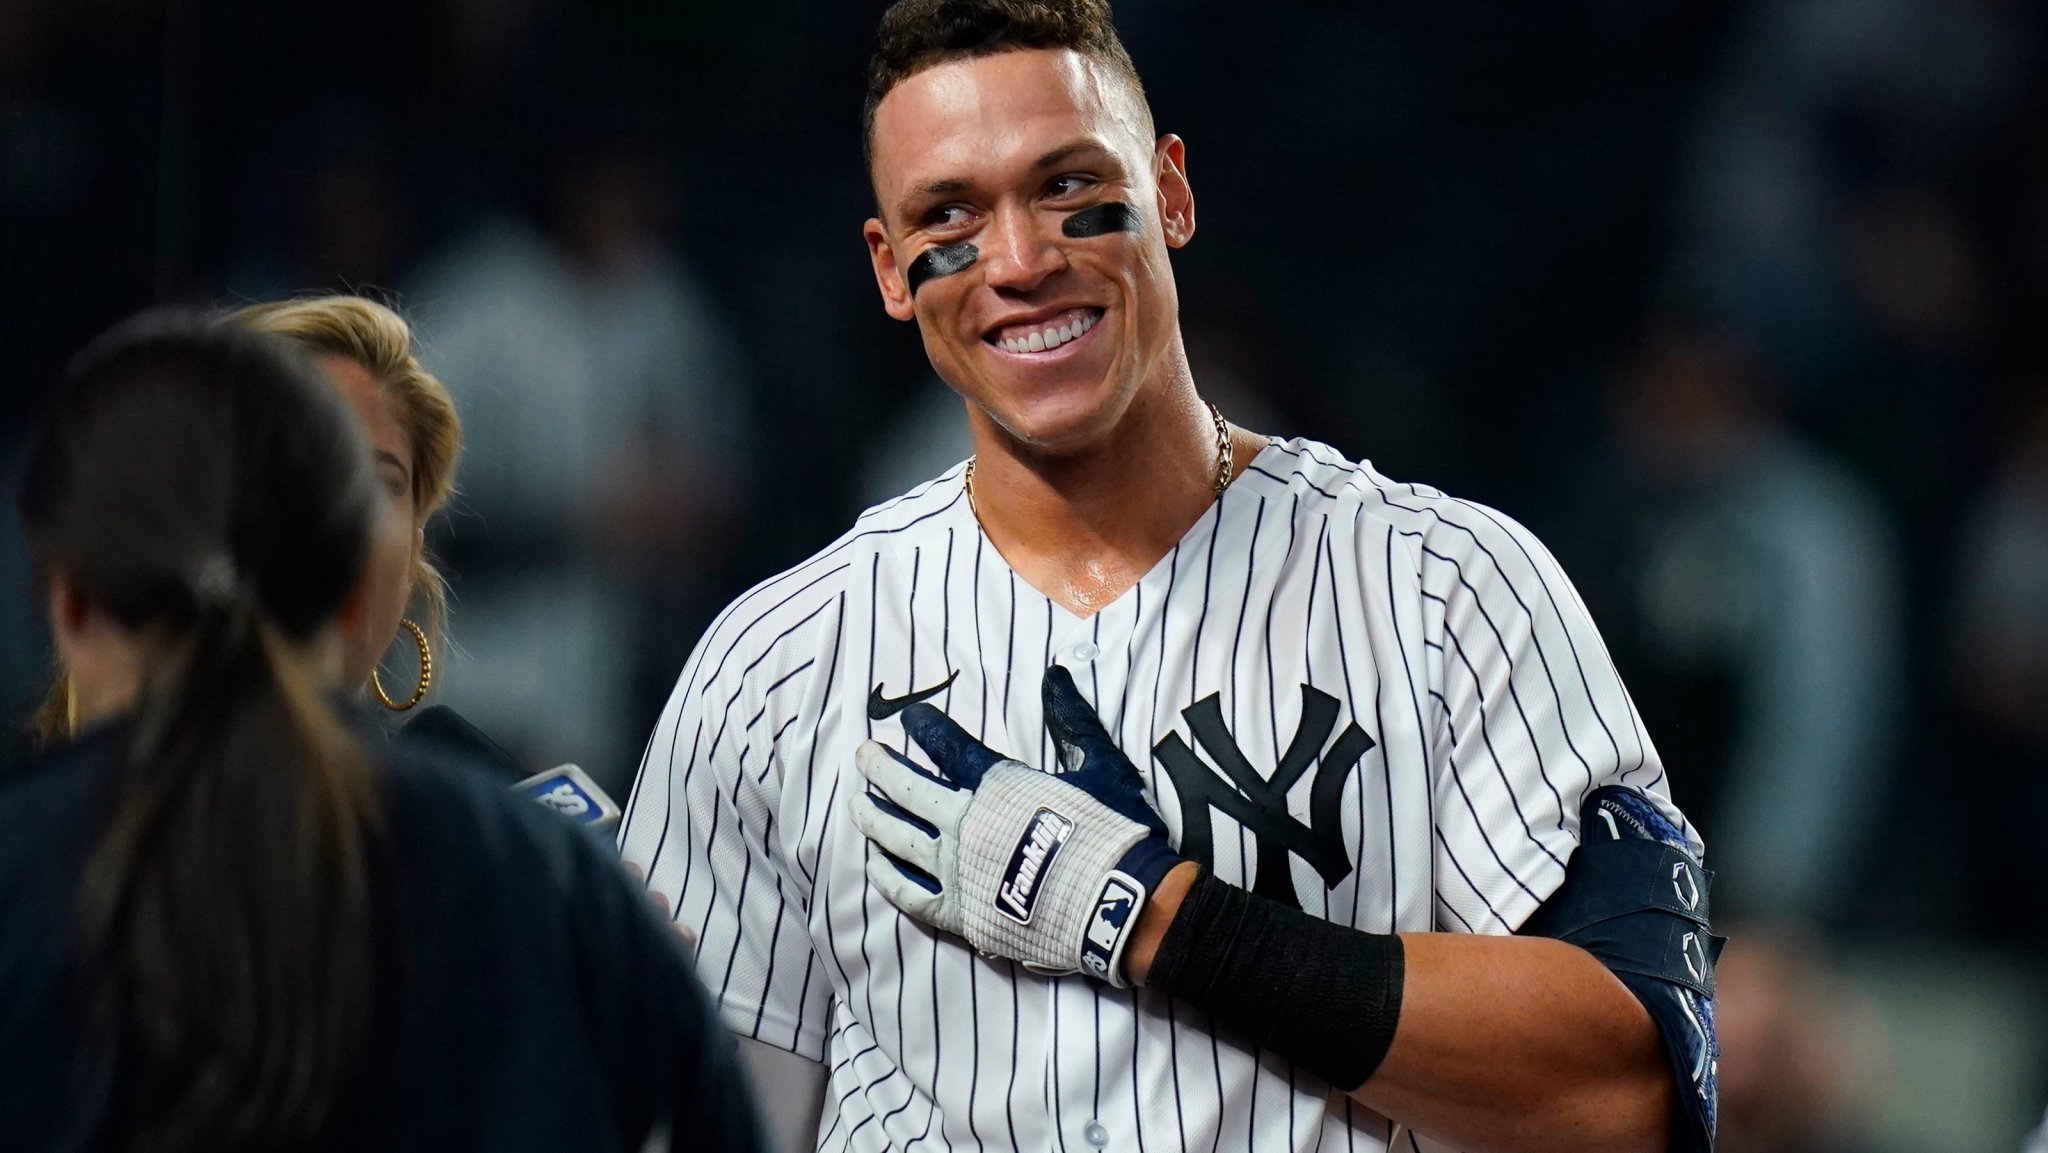 Will Aaron Judge be named the next captain of the New York Yankees?